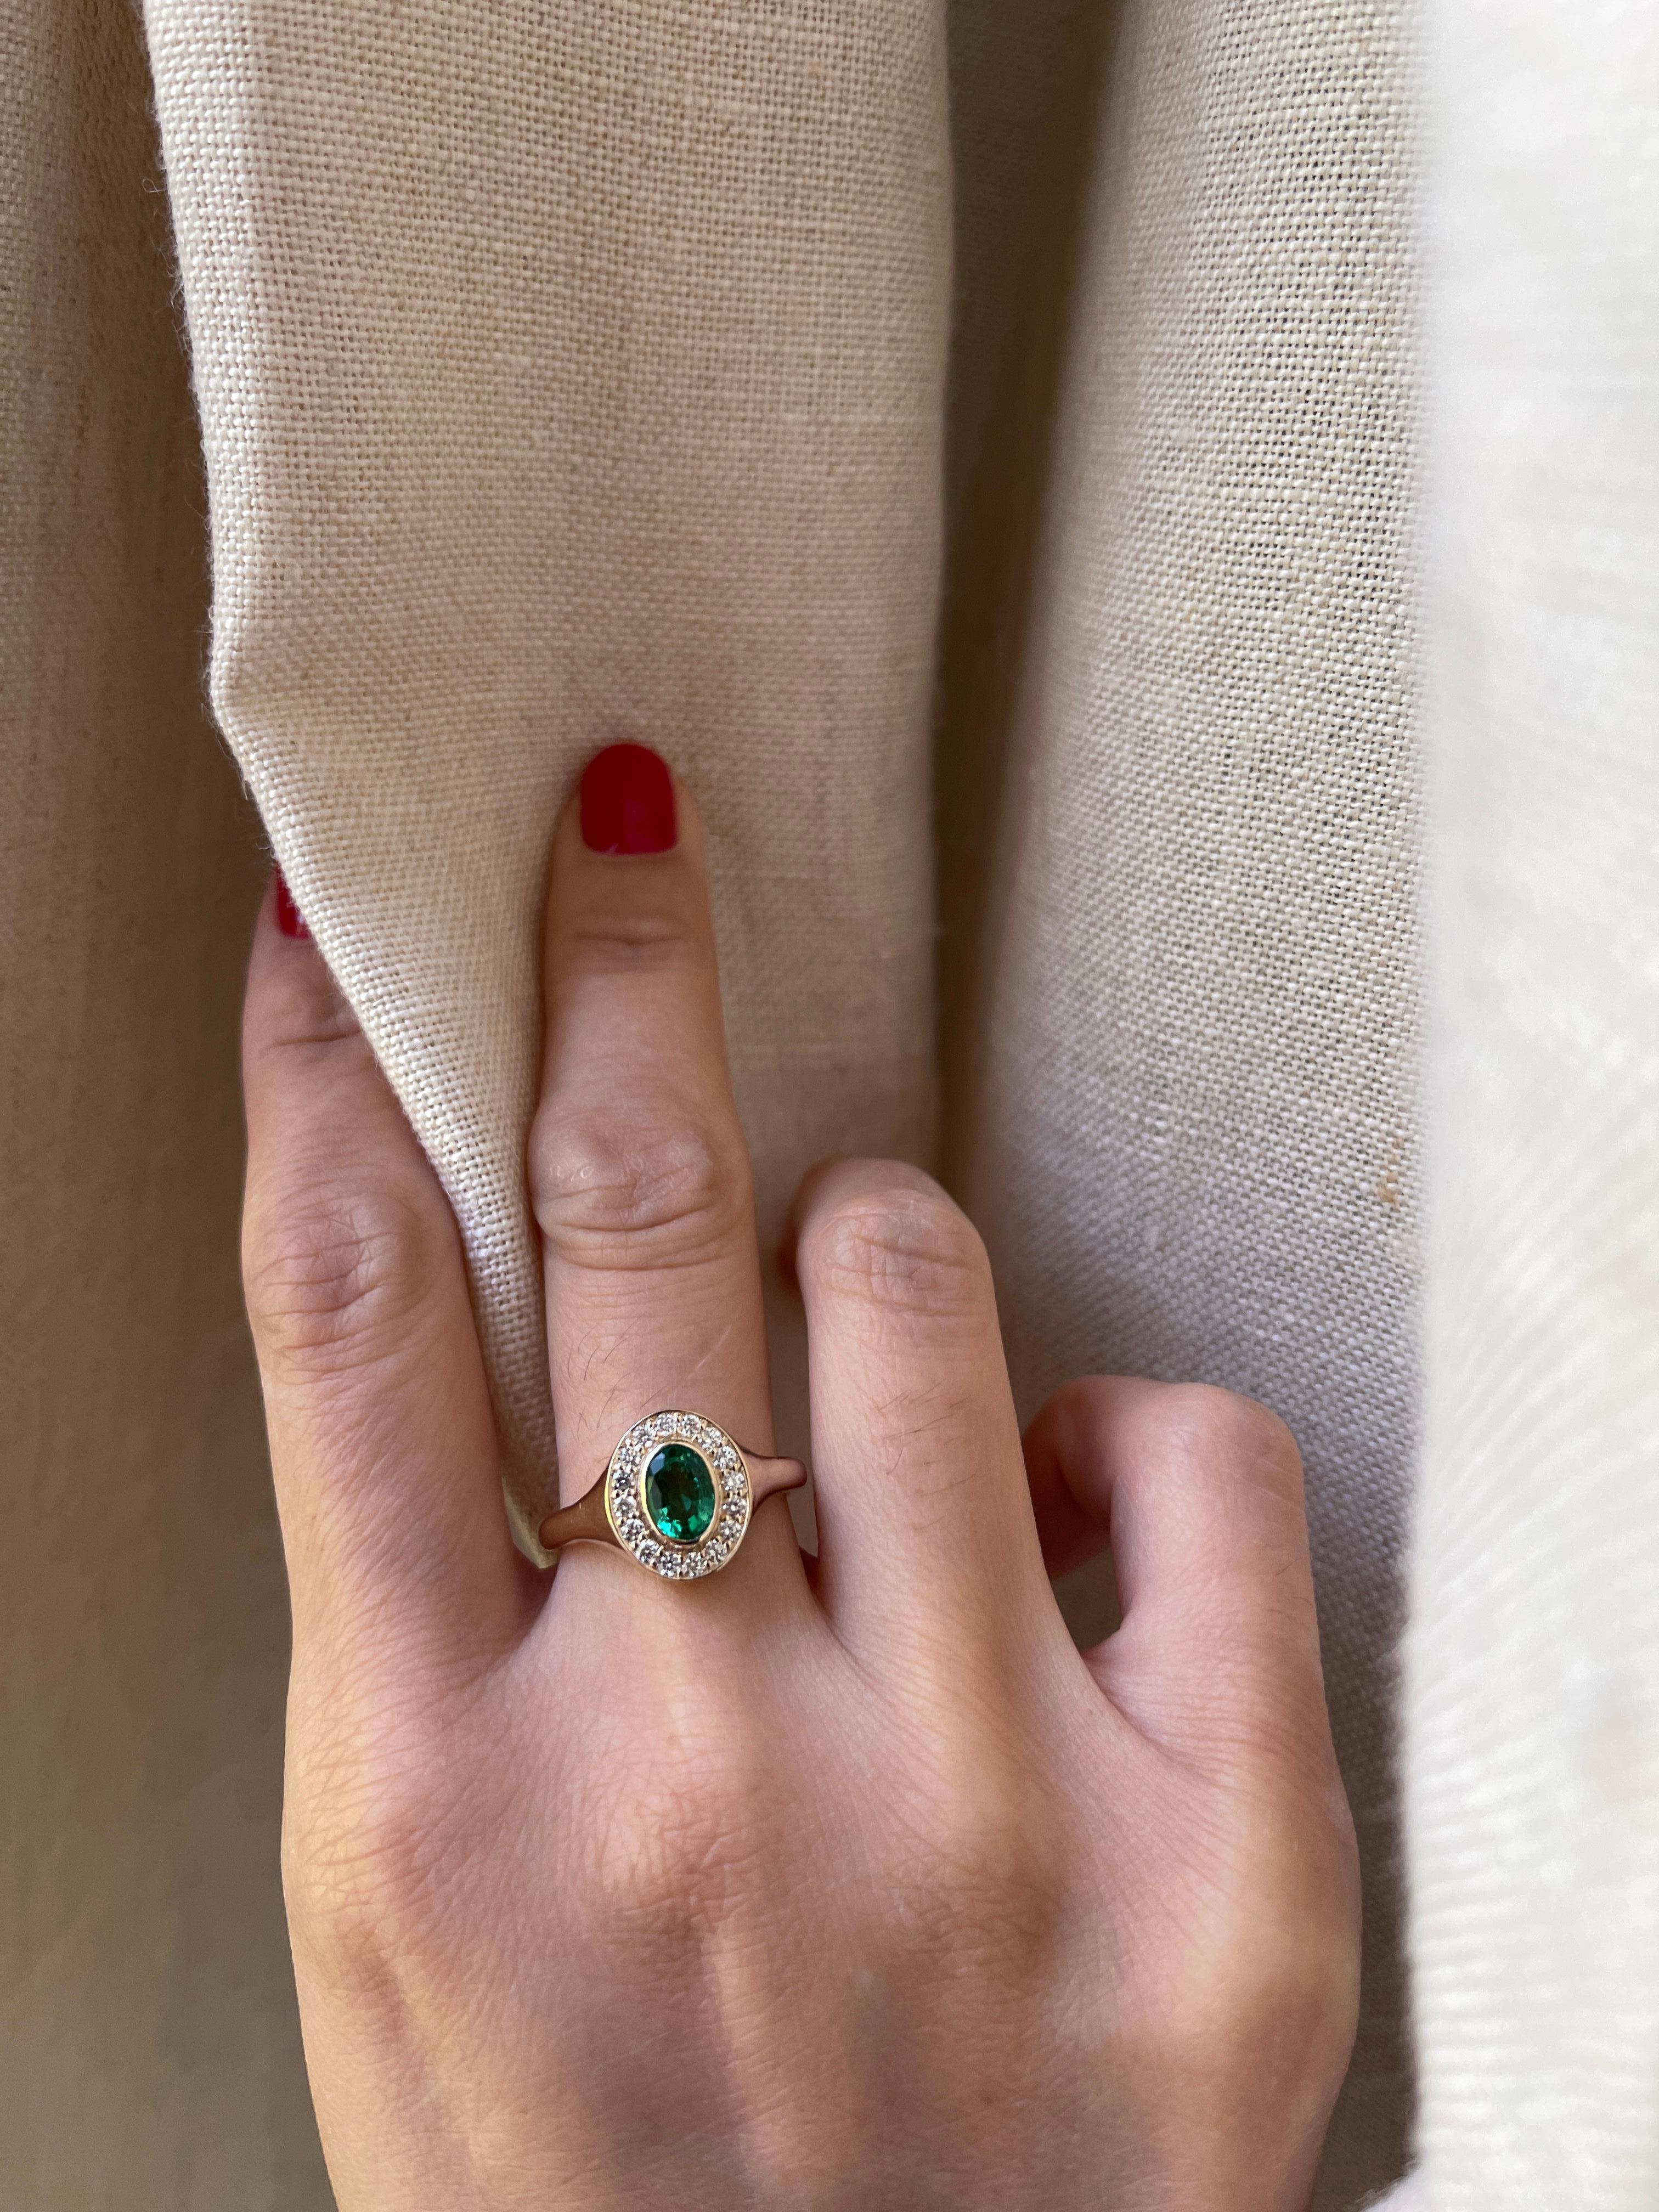 Metal: 14K Yellow Gold
Stone: Zambian Natural Emerald
Stone Size: 5 mm x 6 mm
Stone Shape: Oval
Stone Weight: 0.825 carat
Accent Stones: Natural Diamond
Accent Stone Sizes: 1.5mm
Accent Stone Weight: 0.2 total carat weight
Dimension: 3mm band